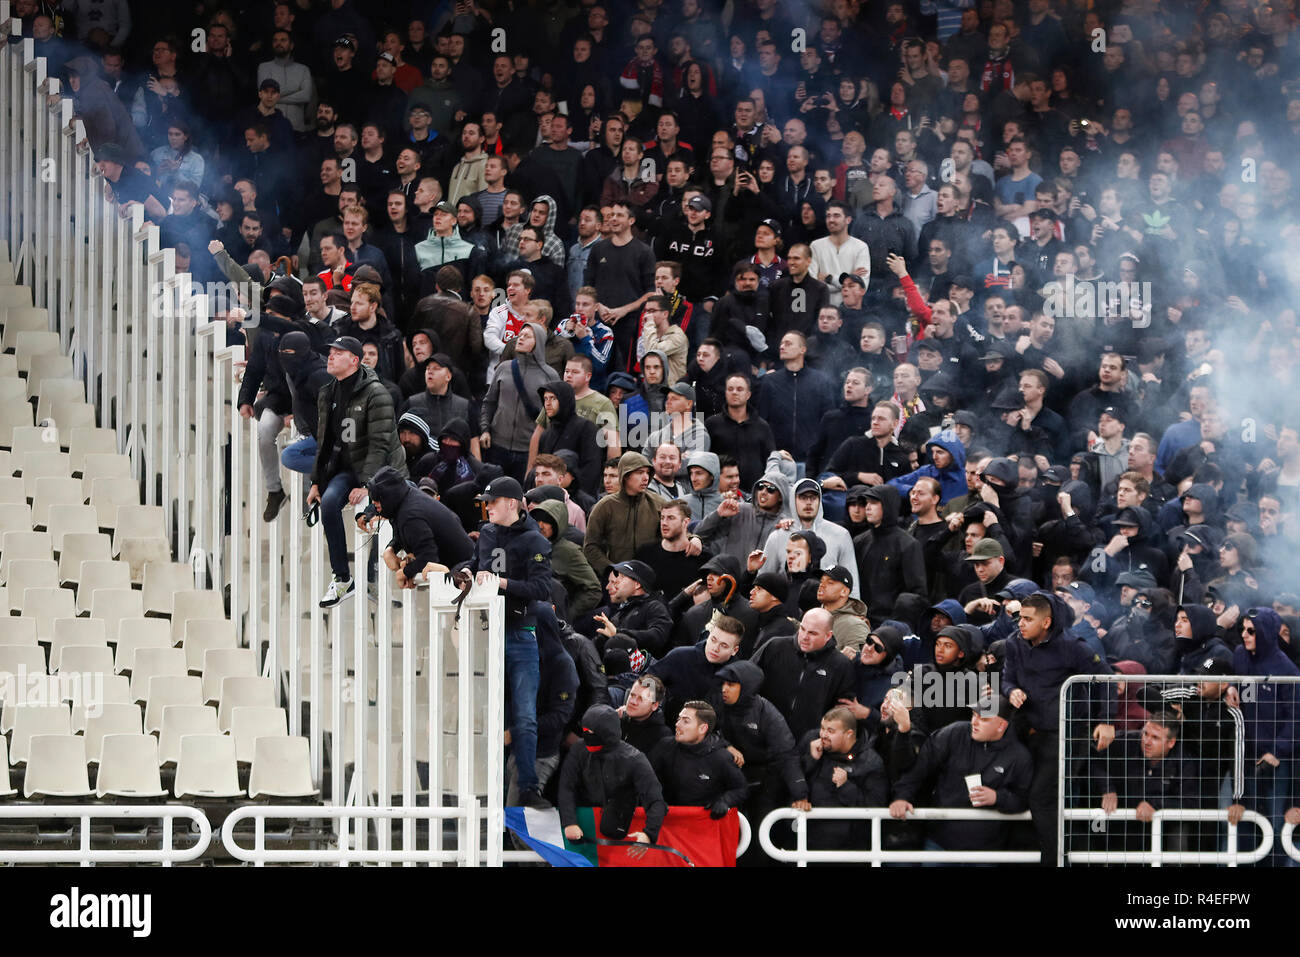 Athens, Greece. 27th November, 2018. ATHENS, Olympic Stadium, AEK Athens FC  - Ajax , football, Champions League, season 2018-2019, 27-11-2018, Ajax  supporters fighting on the stands during the game AEK Athens -